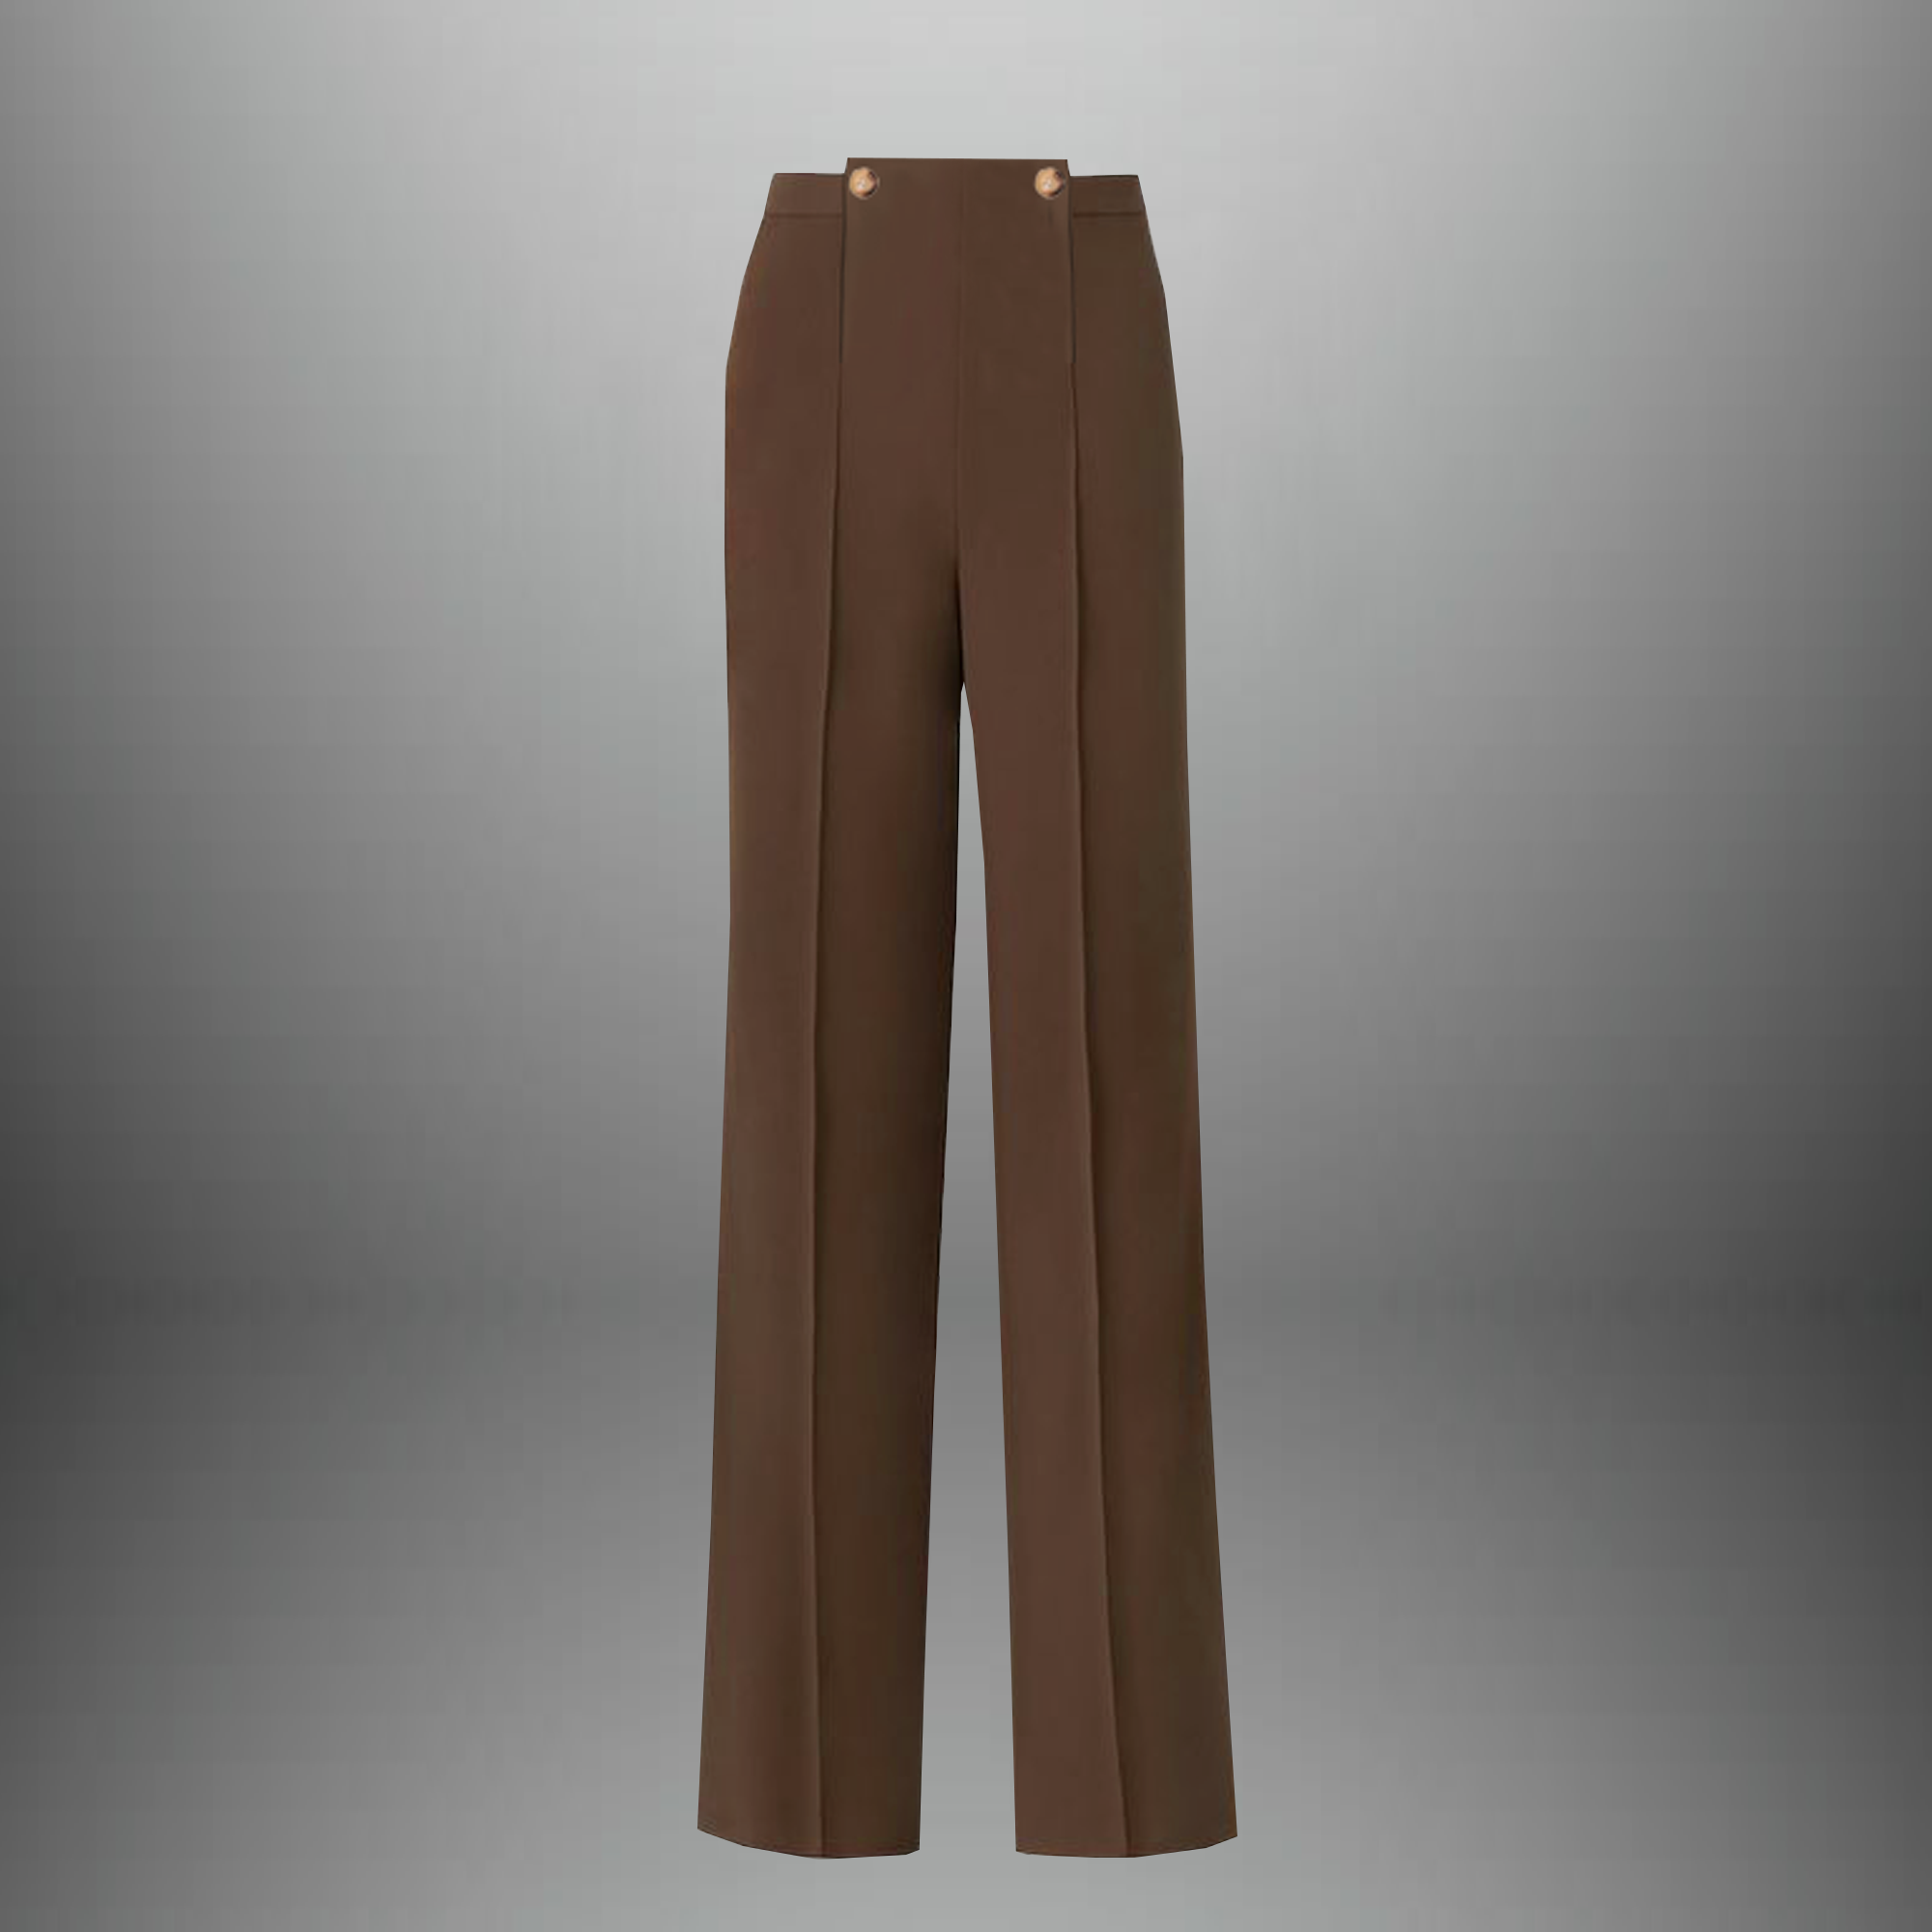 Women's Brown Semi formal trouser with button embellishment-RCP023